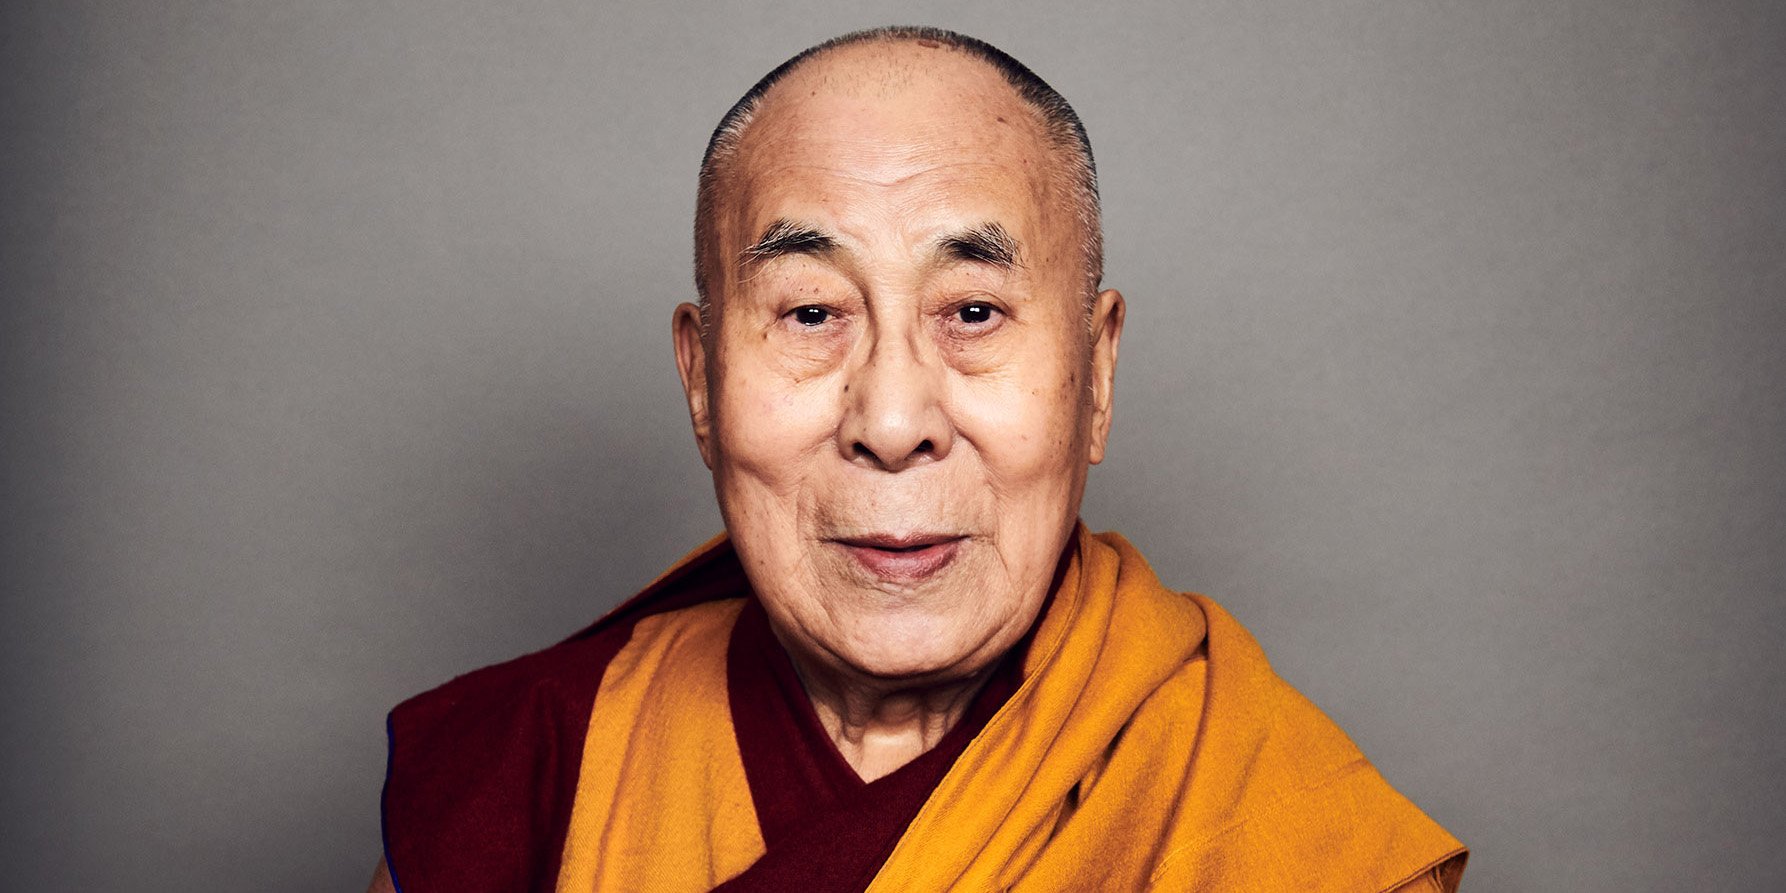 'Prayer Is Not Enough.' The Dalai Lama on Why We Need to Fight Coronavirus With Compassion